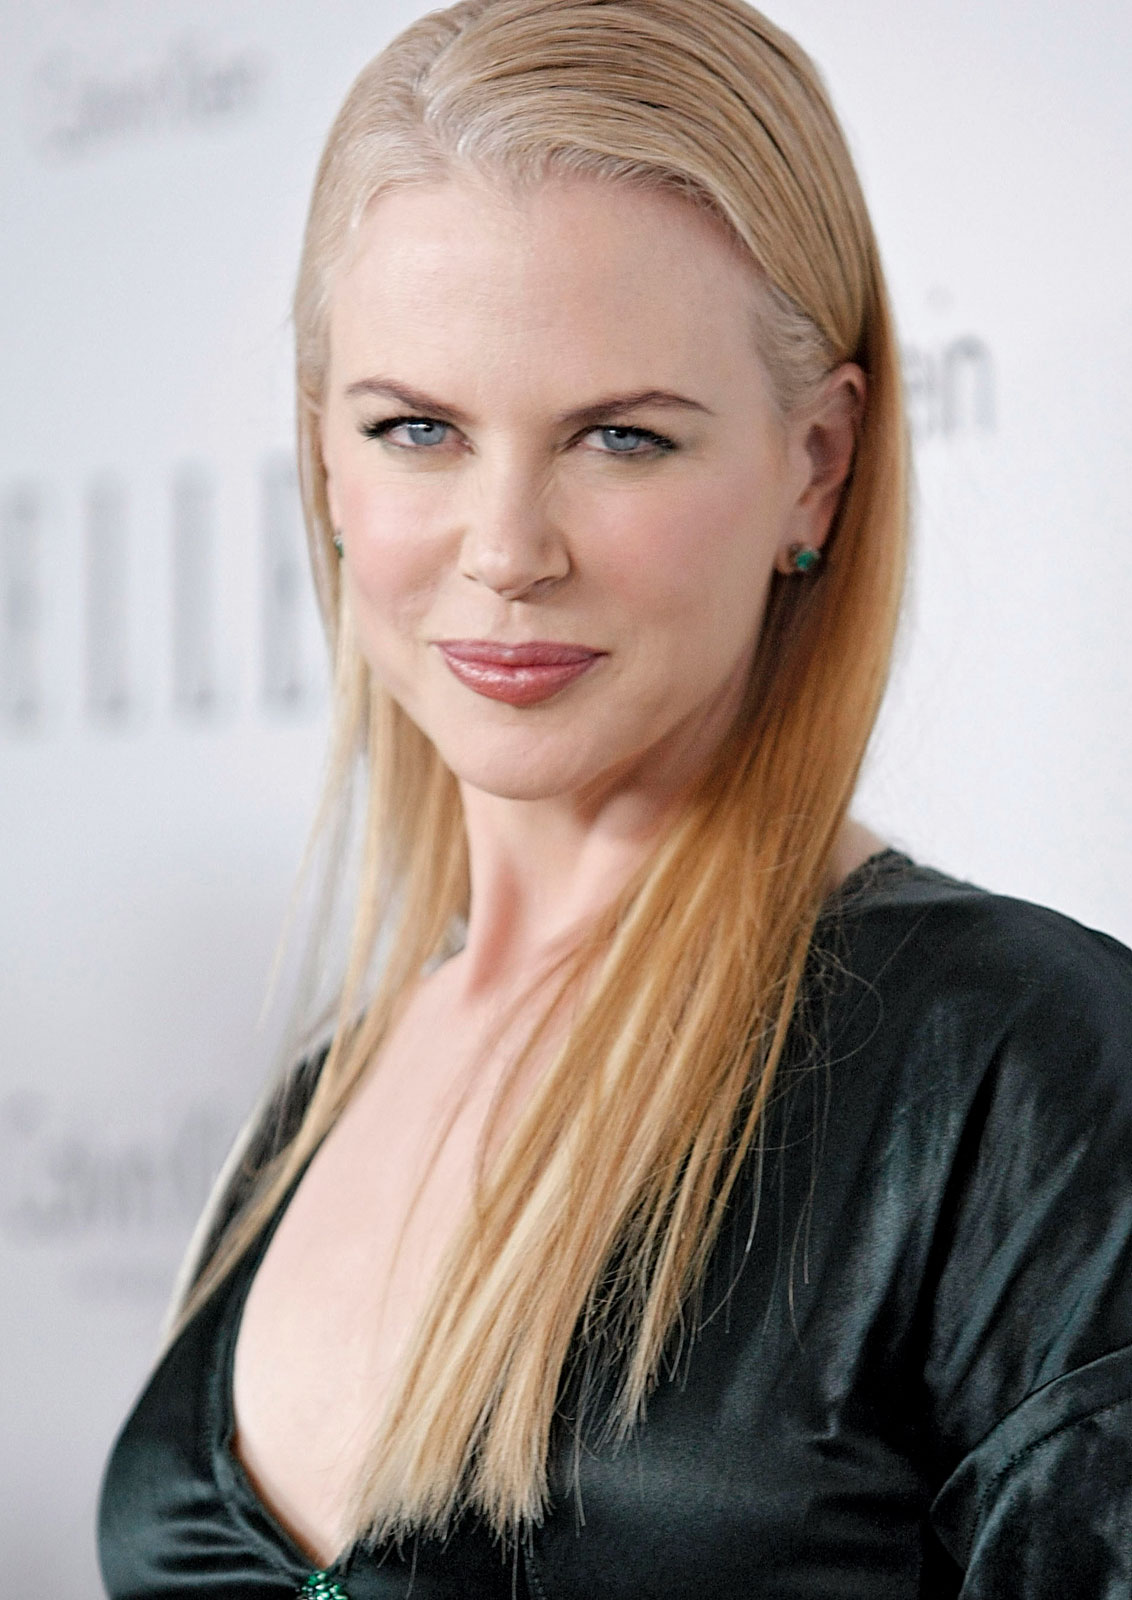 Photo Studio 308 What Colors to Wear for Your Skin Tone Nicole Kidman